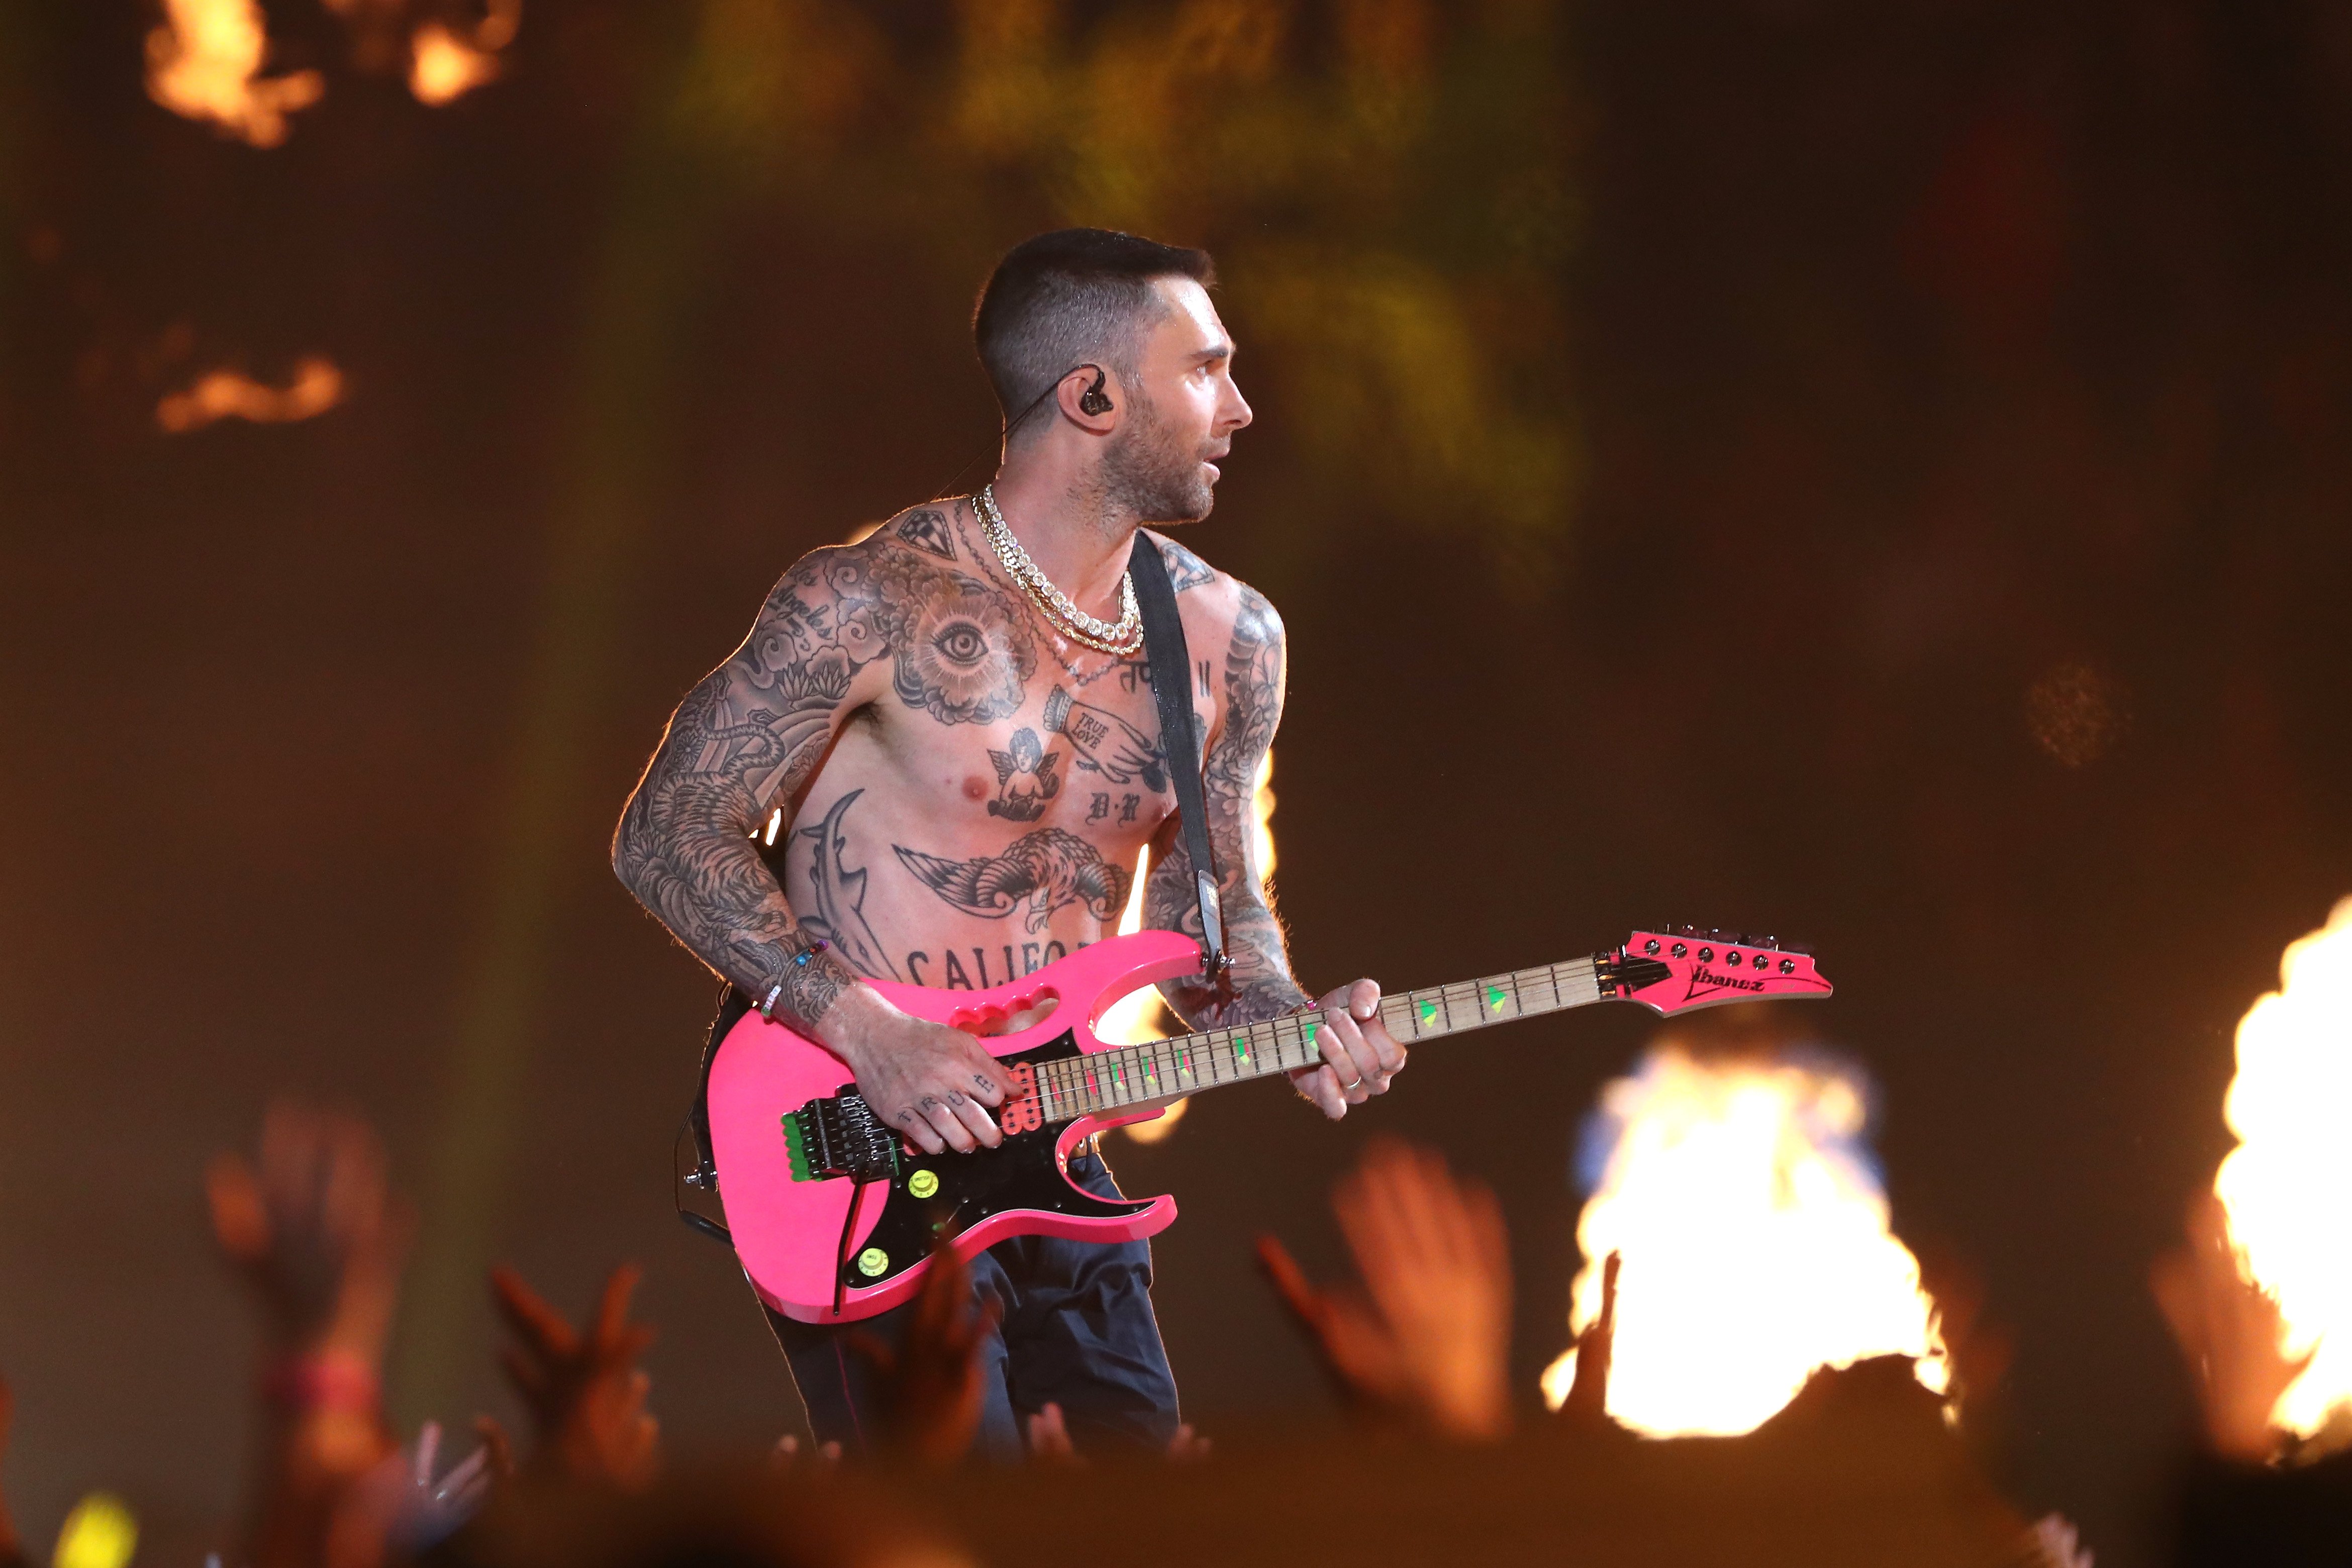 Adam Levine Wins At Shirt Removal The Super Bowl Time